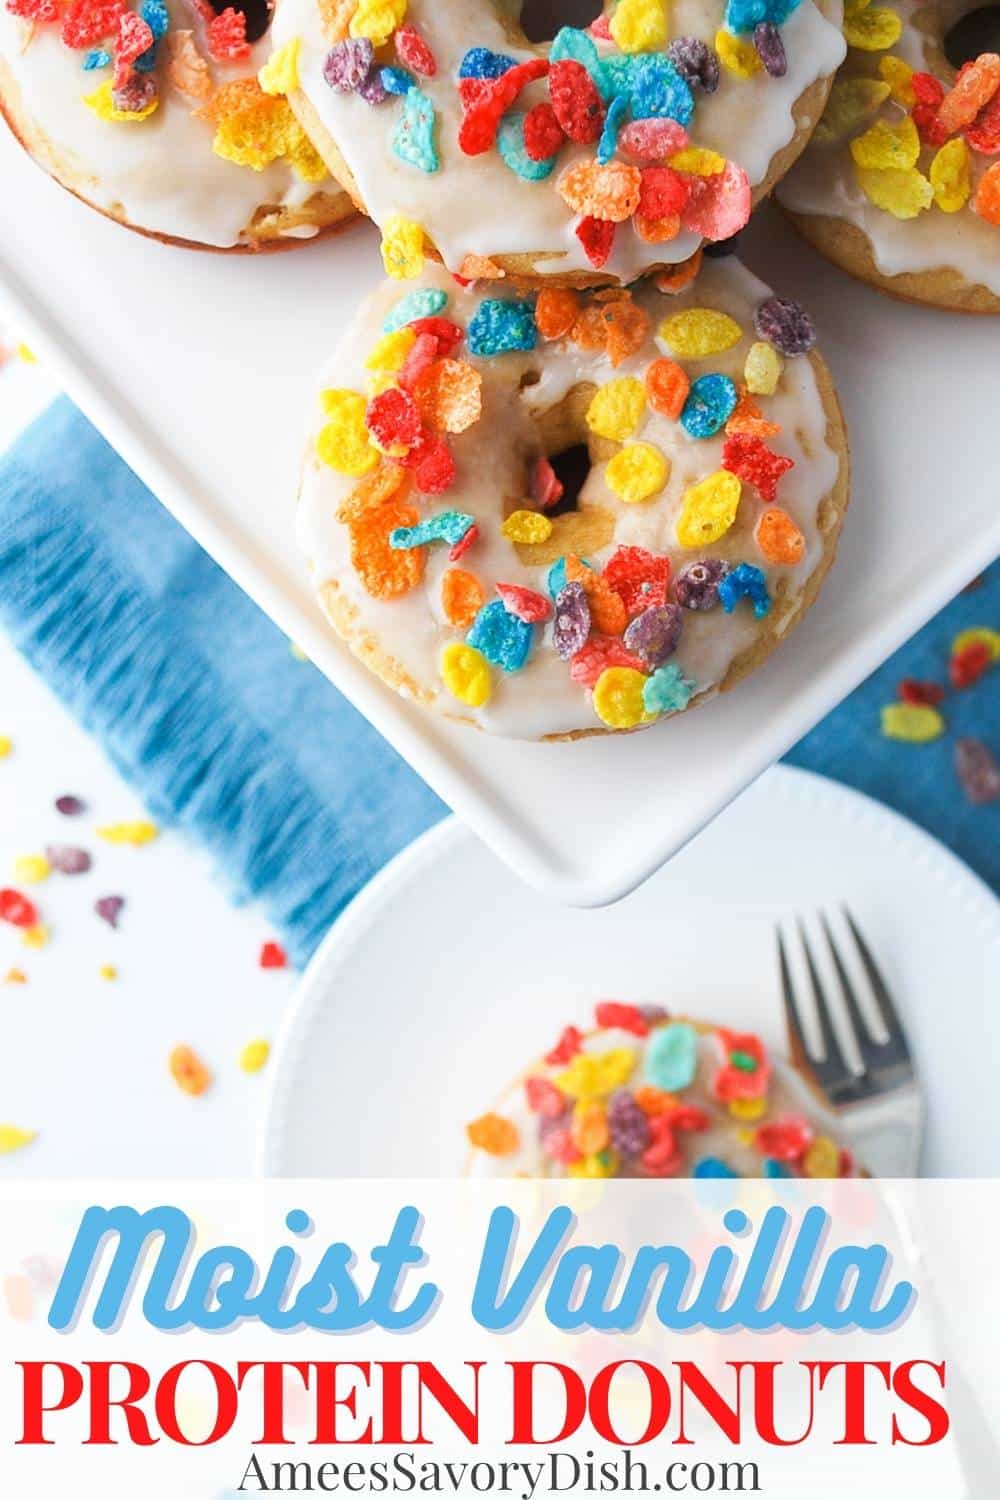 A delicious recipe for vanilla protein donuts made with a blend of oats and flour and sweetened with maple syrup.  When that donut craving strikes, these baked donuts are the perfect solution! via @Ameessavorydish